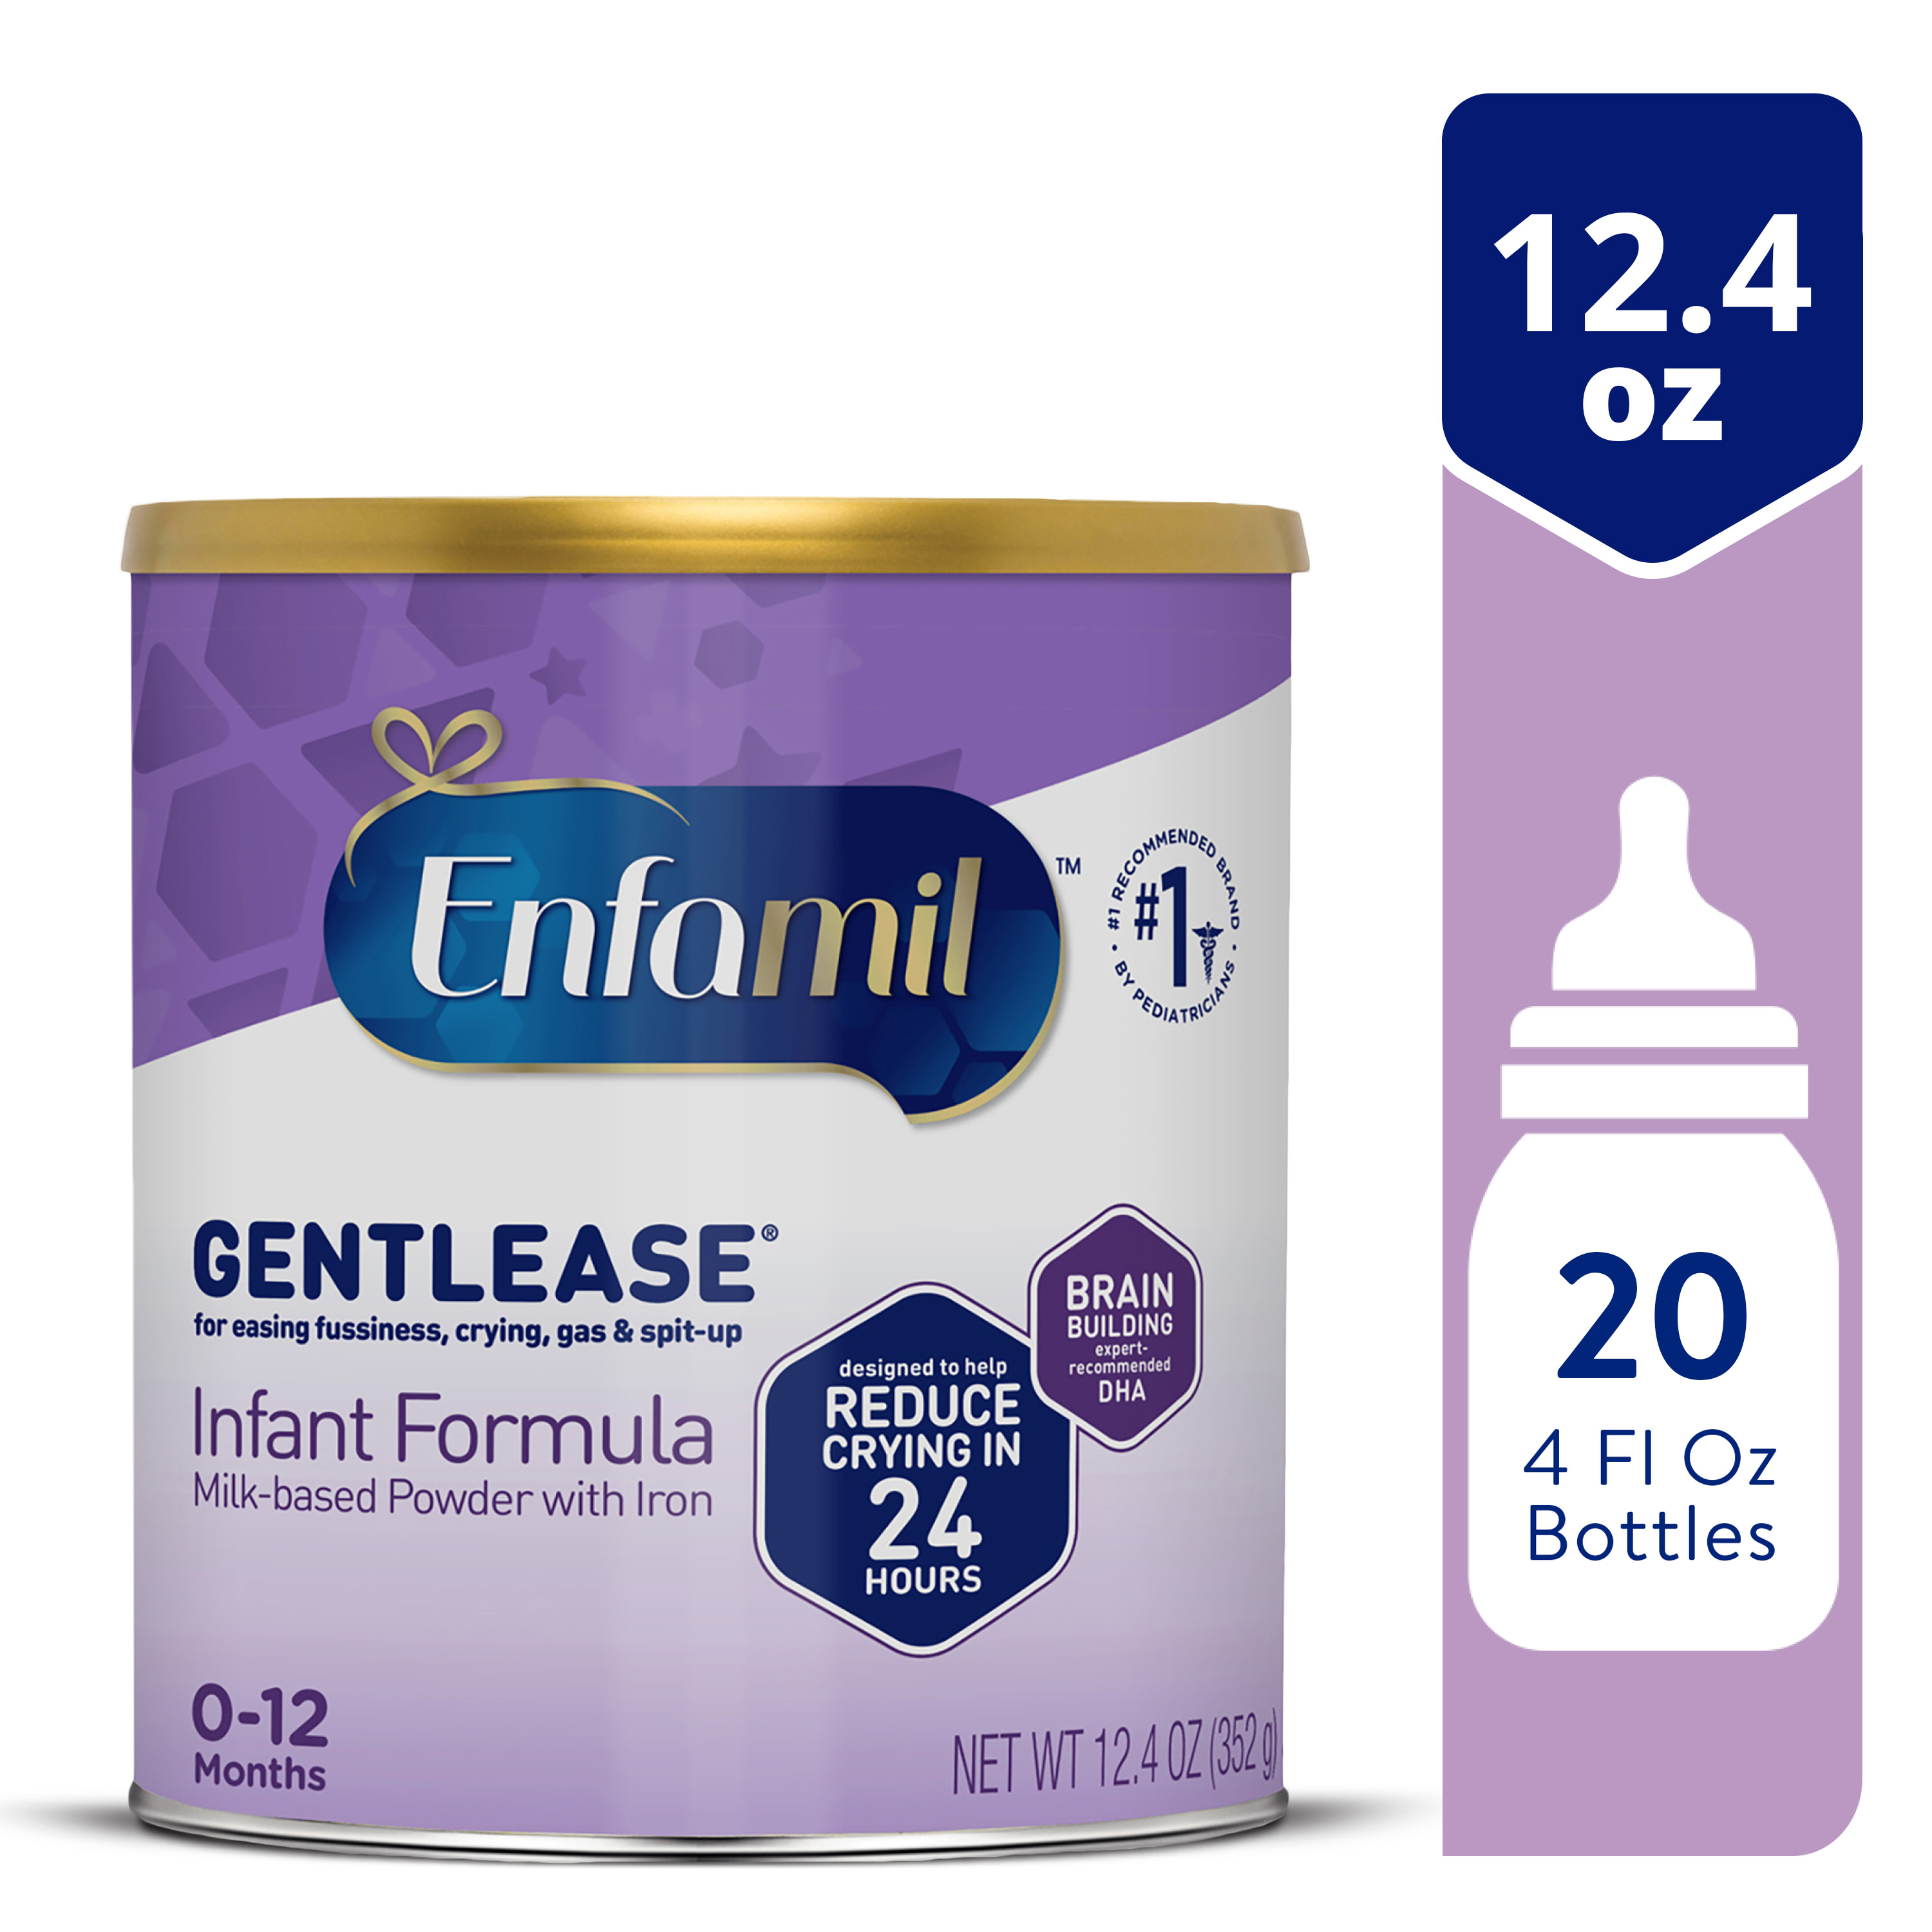 Enfamil Gentlease Baby Formula, Clinically Proven to Reduce Fussiness, Crying, Gas & Spit-up in 24 hours, Brain-Building Omega-3 DHA & Choline, Baby Milk, 12.4 Oz Powder Can​ - image 1 of 12